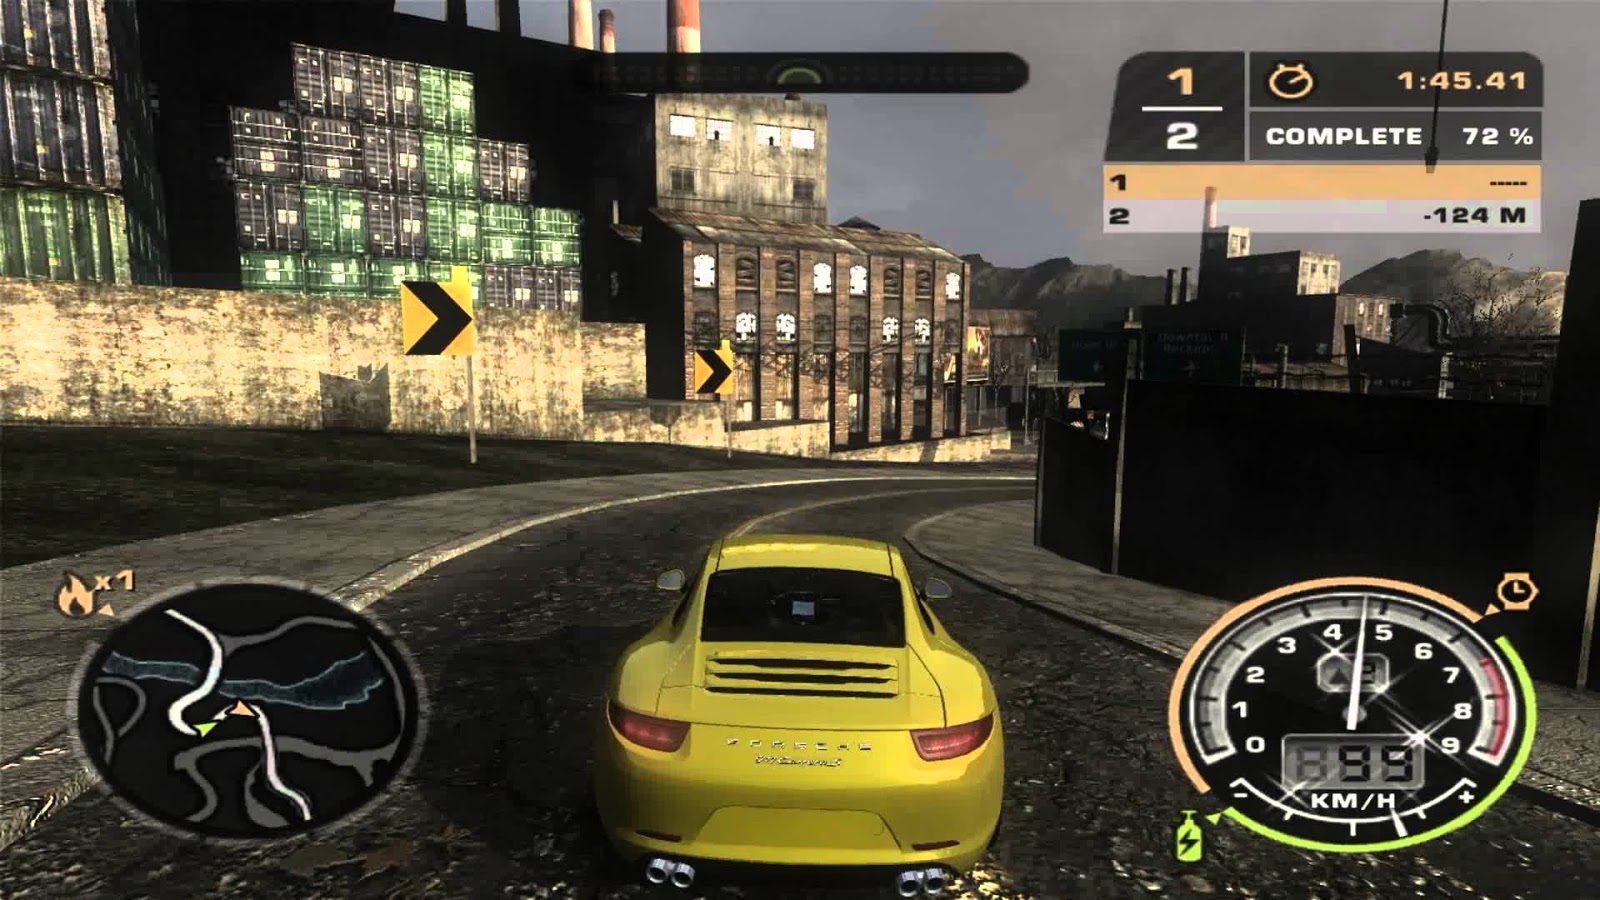 nfs most wanted black edition torrent